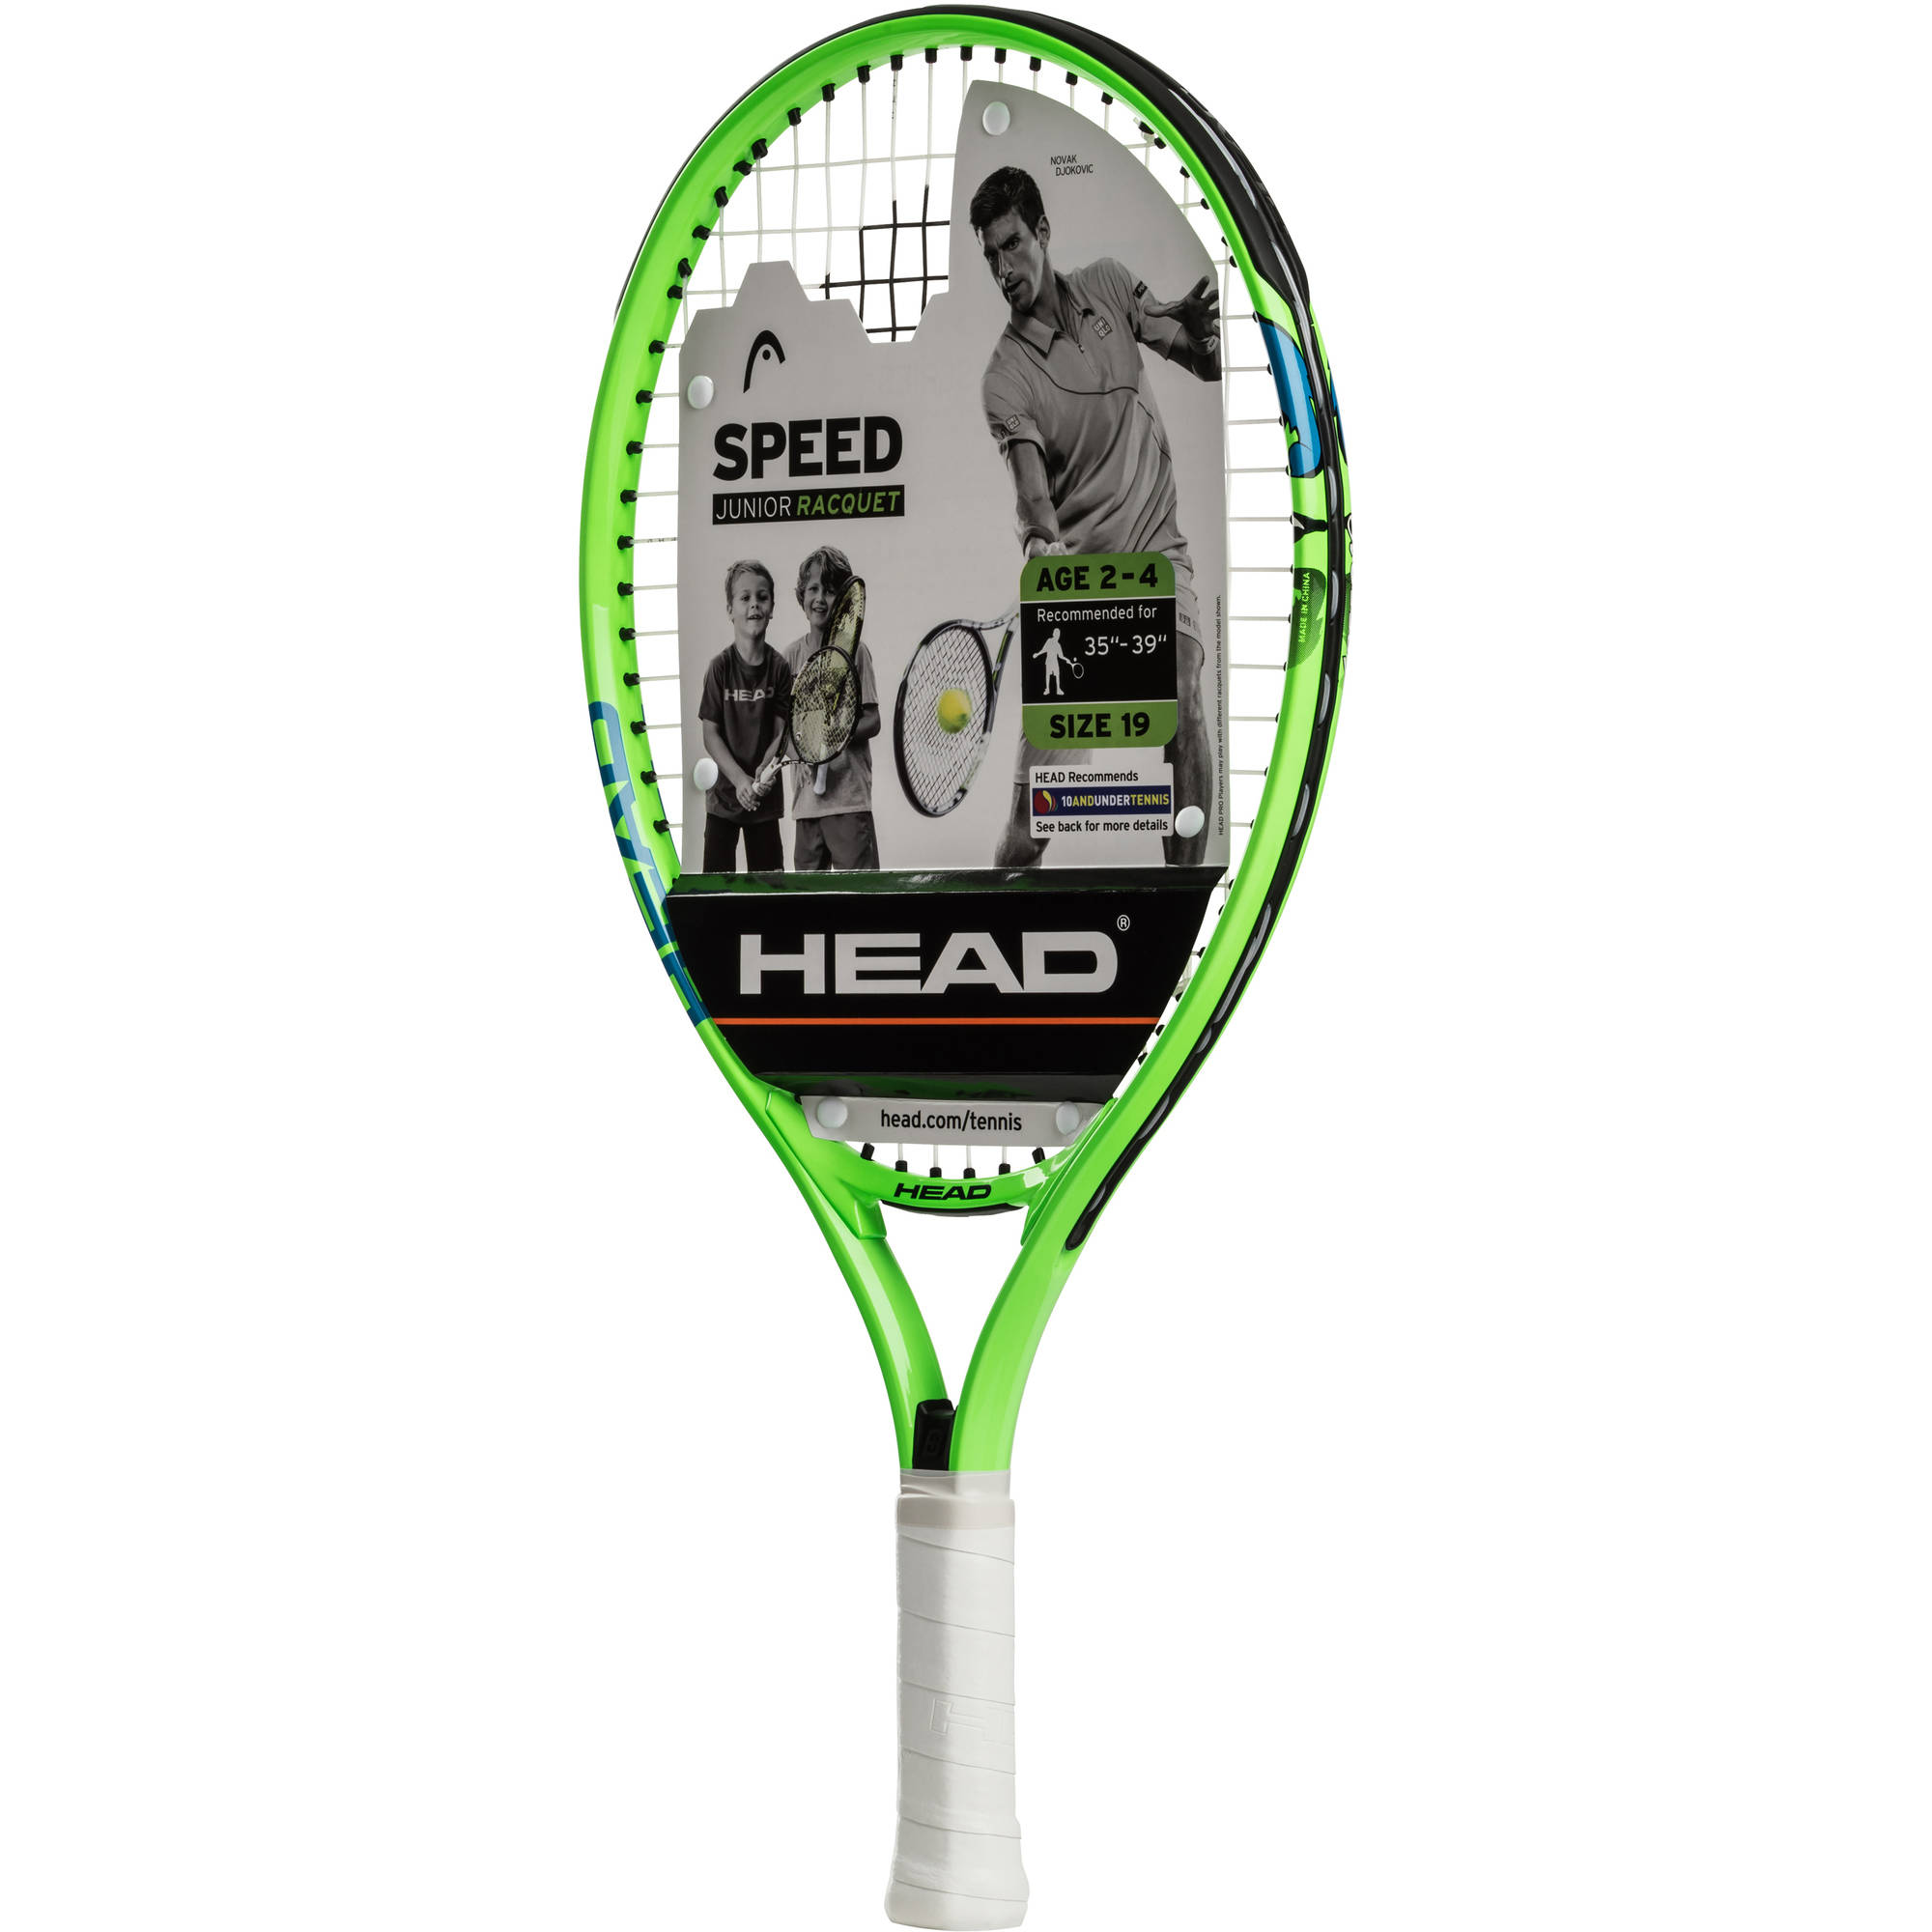 HEAD Speed 19 Junior Tennis Racquet, 81 Sq. in. Head Size, Green, 6.2 Ounces - image 1 of 2